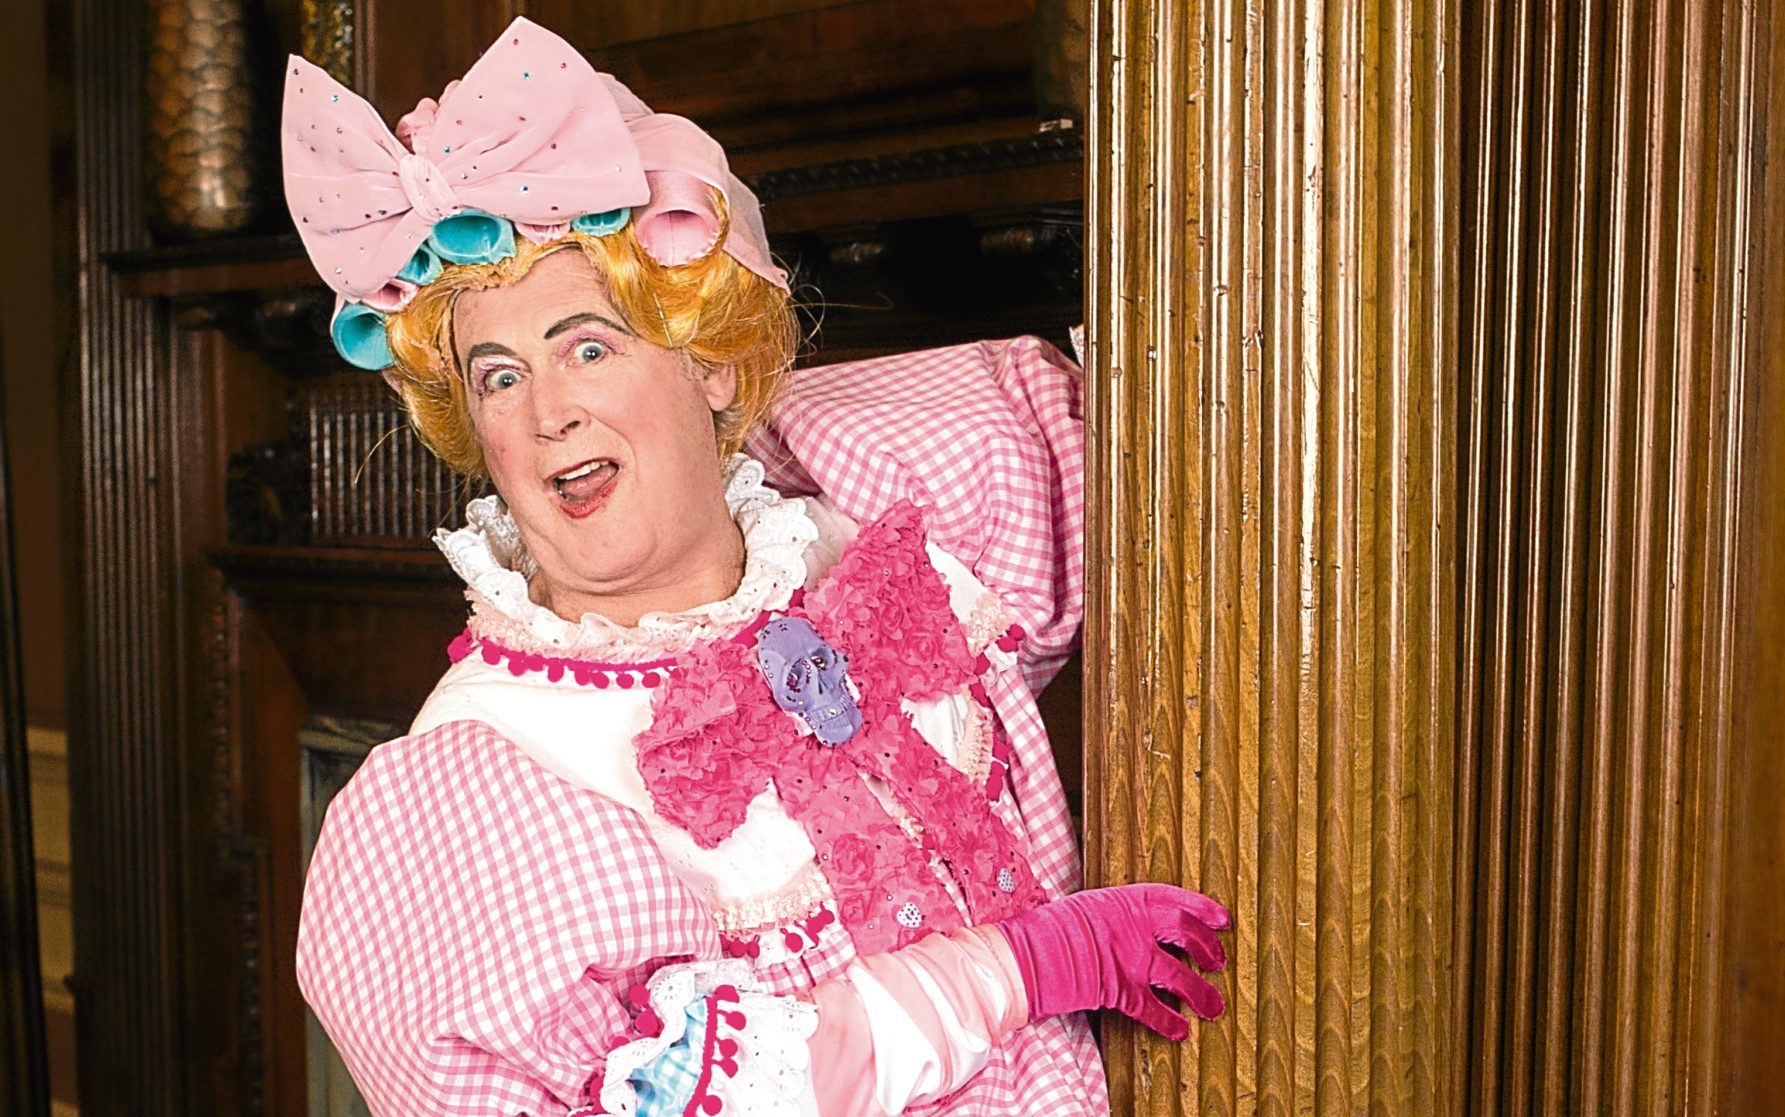 Tony Roper plays one of the ugly step-sisters (John Kirkby)